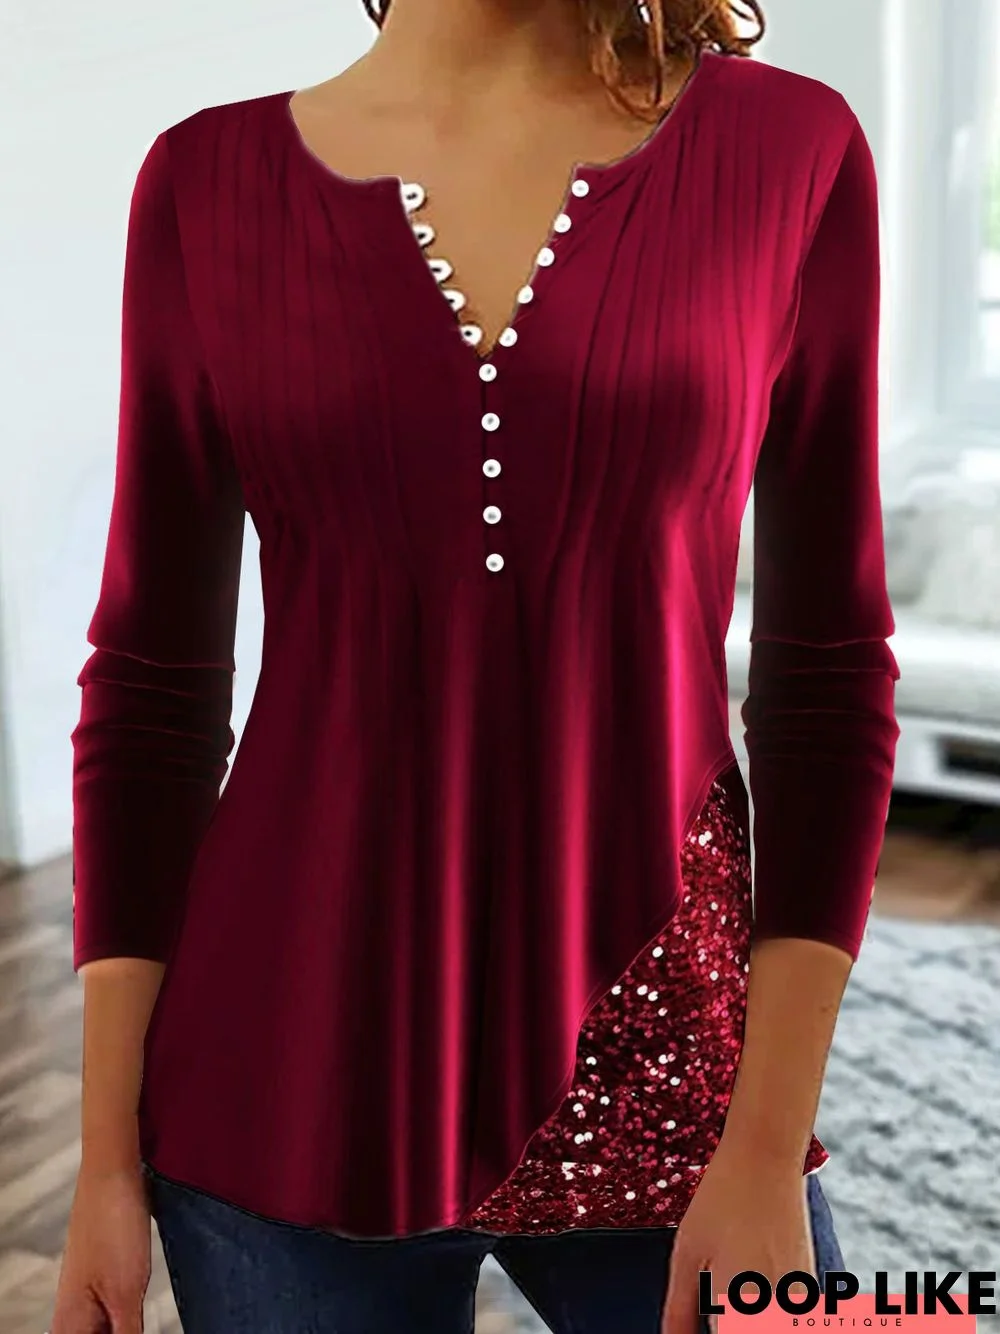 Patchwork Sequins velvet Casual Long Sleeve TUNIC Top